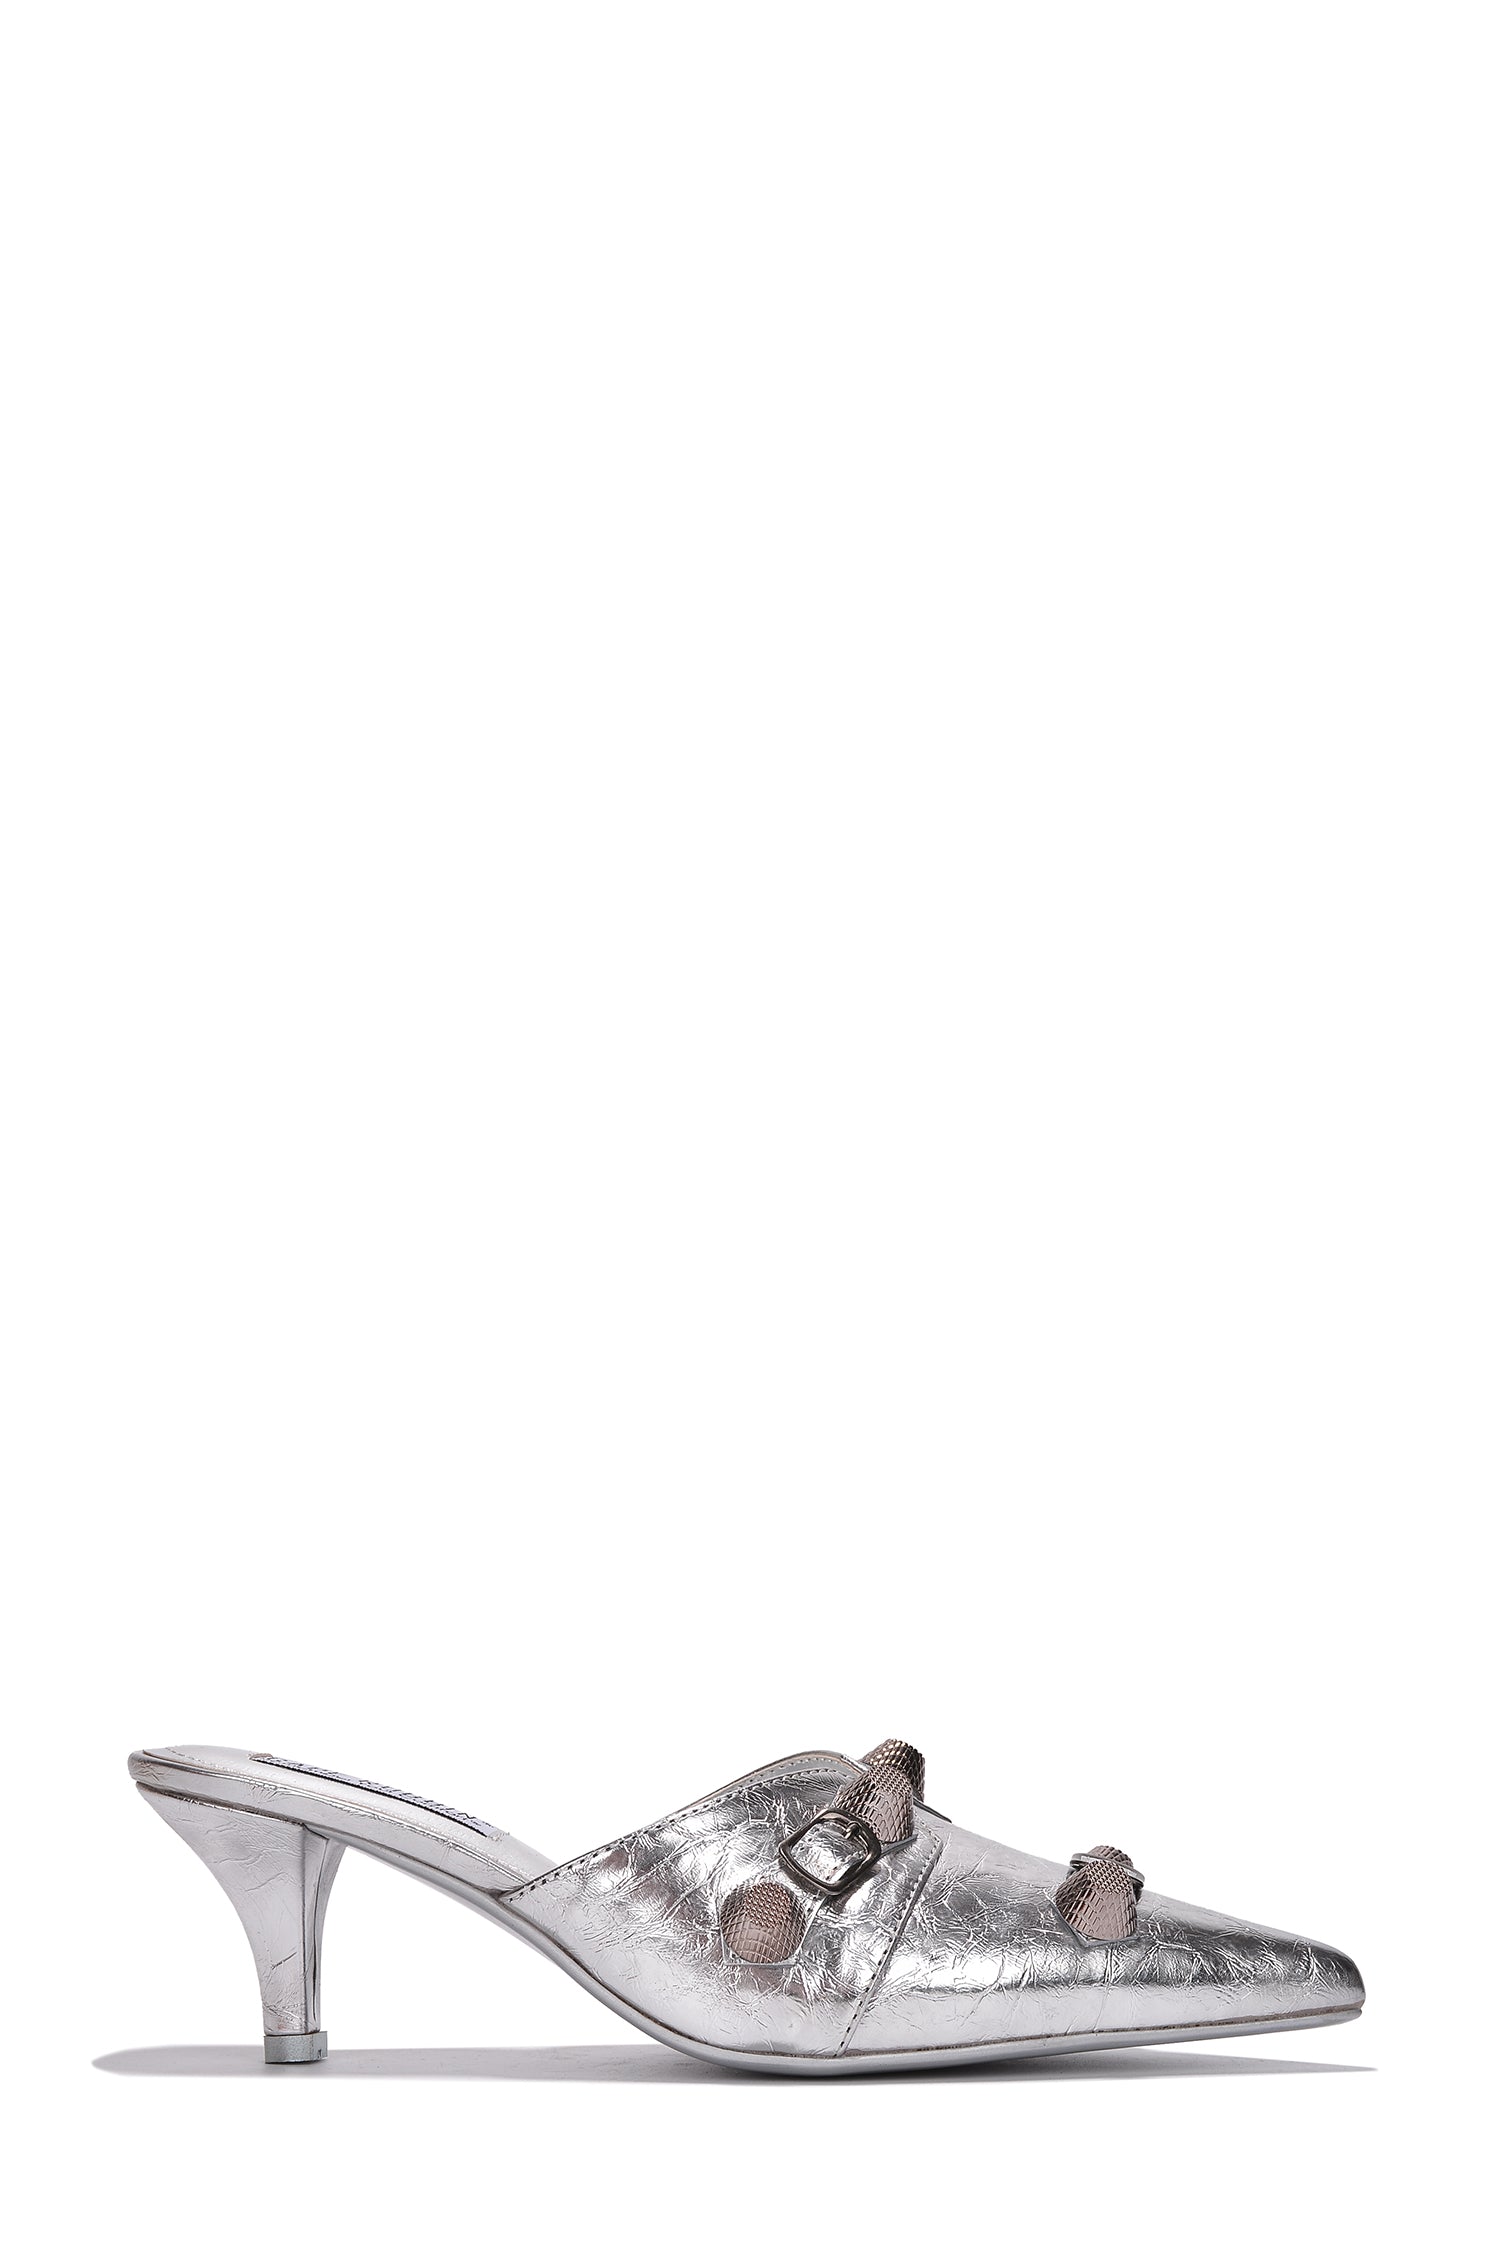 UrbanOG - Vivianly Studded Metallic Pointed Toe Barely There Heels - HEELS